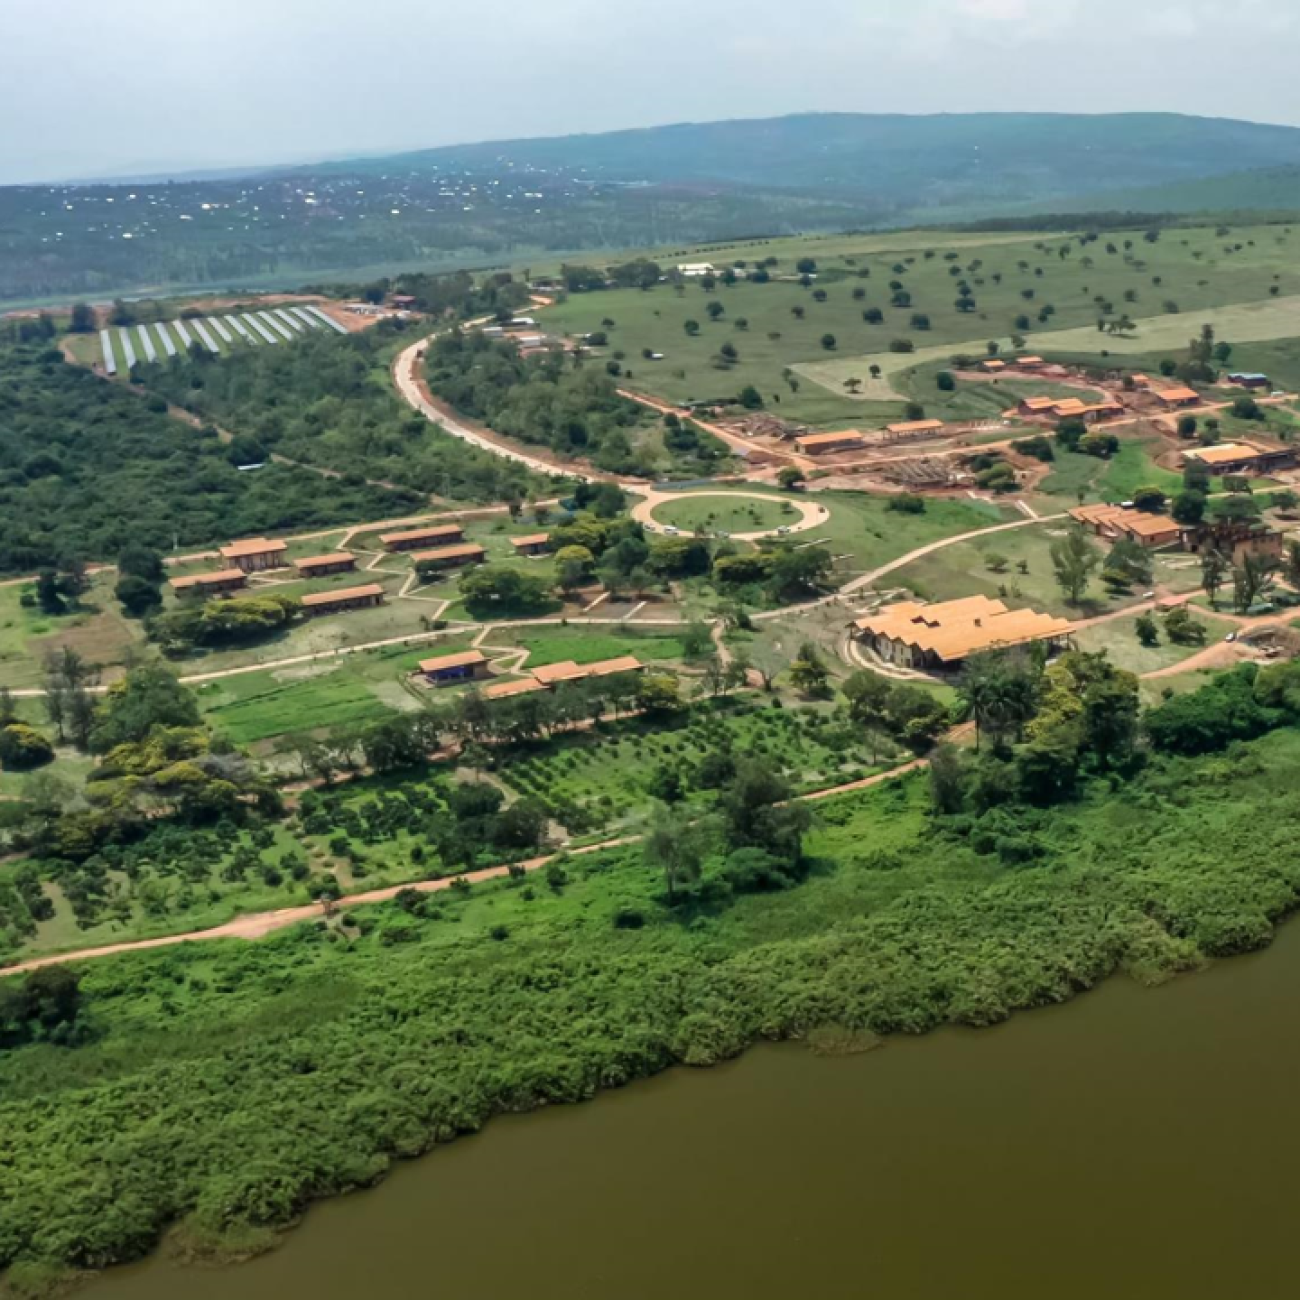 An aerial view of the green campus with earth-colored buildings alongside a river